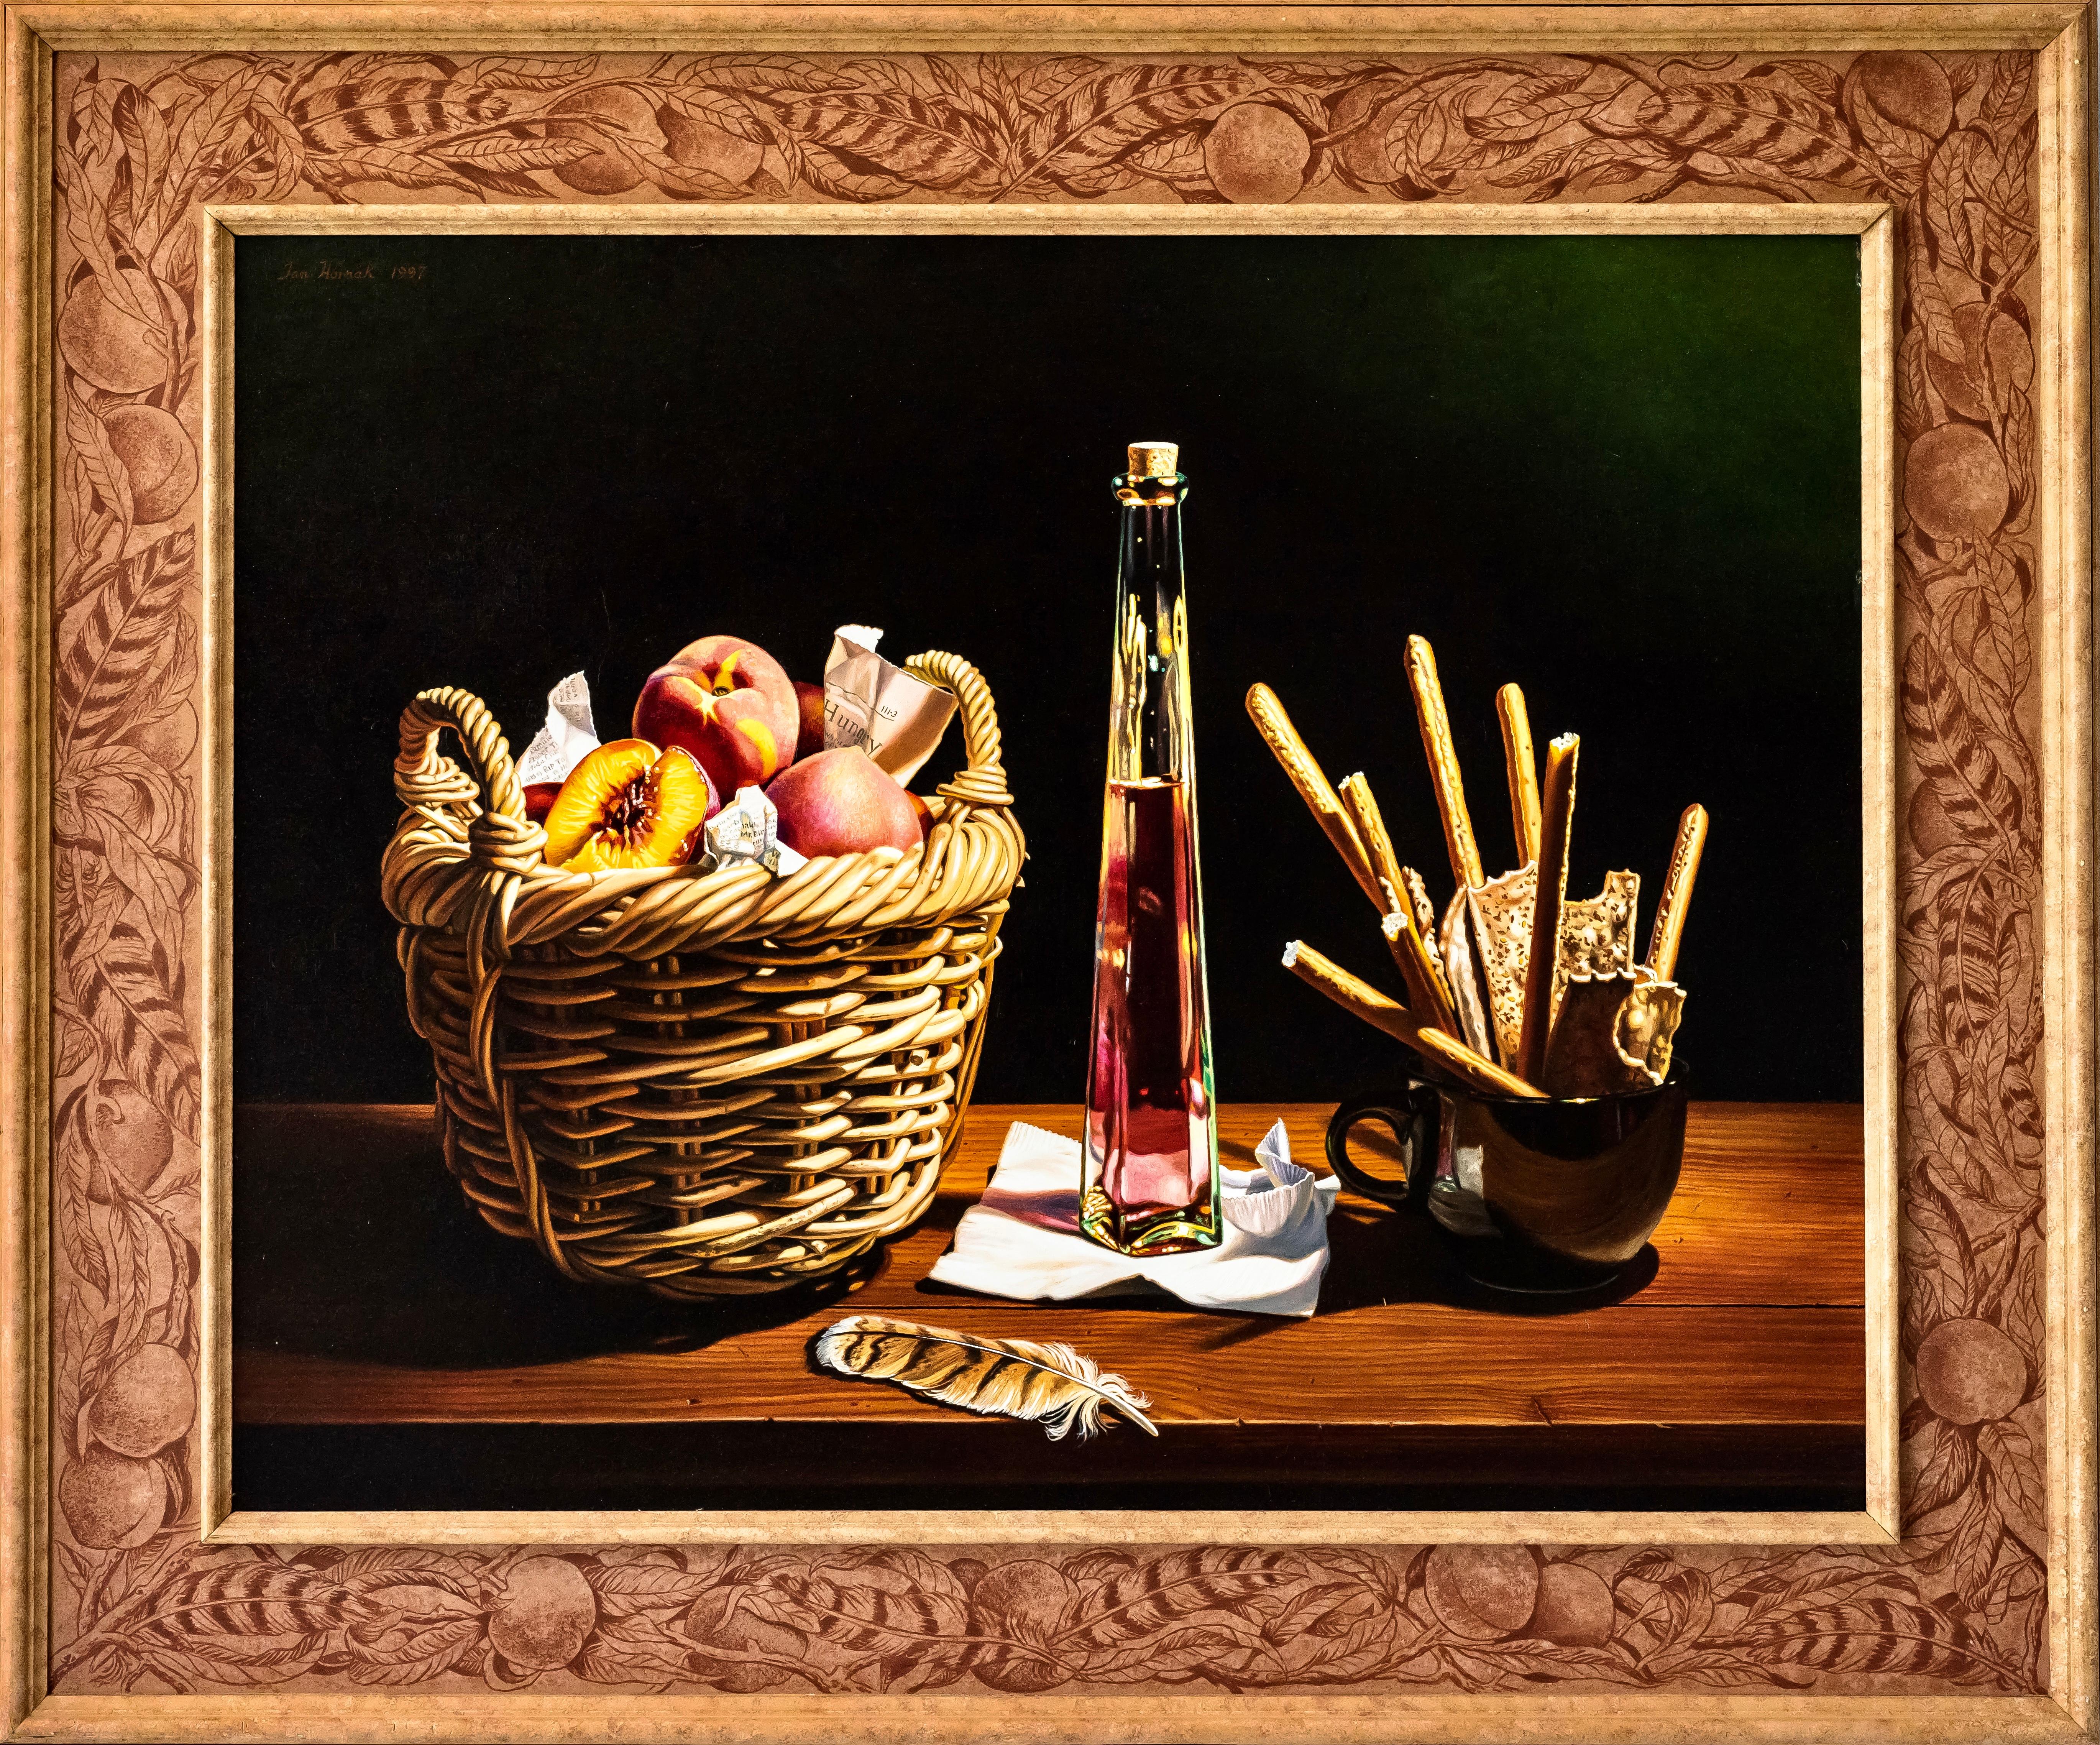 Artist: Ian Hornak (1944-2002)
Title: Still Life w/Basket of Peaches and Feather
Year: 1997
Medium: Oil on Panel, with Artist Painted Frame
Size: 44.50 x 53.50 inches
Condition: Excellent
Inscription: Signed, dated, and titled by the